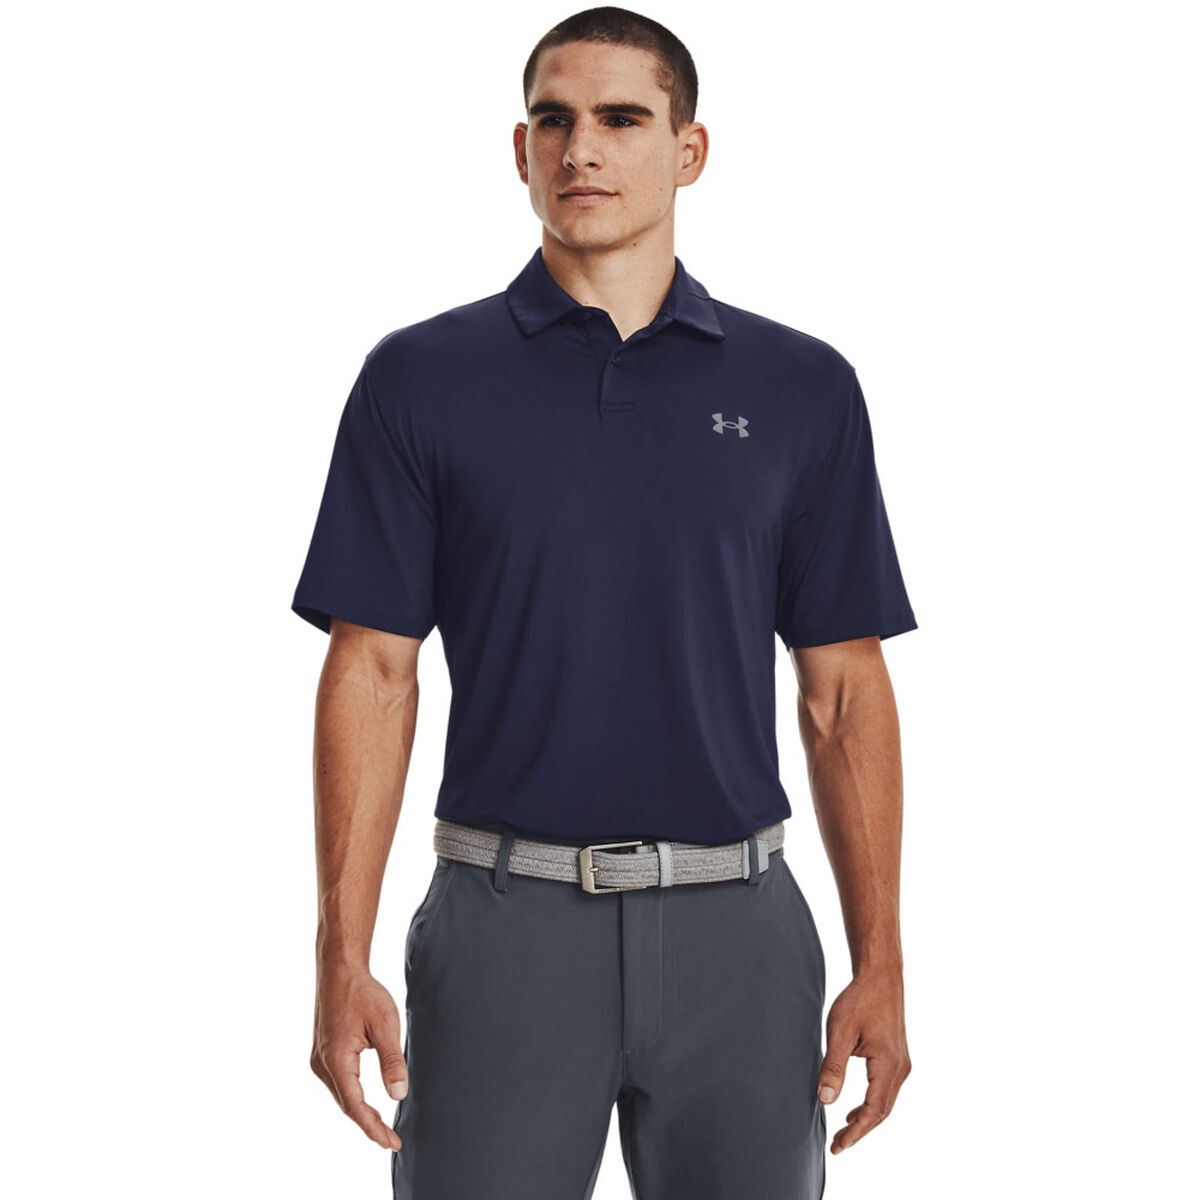 Under Armour Men’s Tee to Green Golf Polo Shirt, Mens, Midnight navy/pitch gray, Small | American Golf